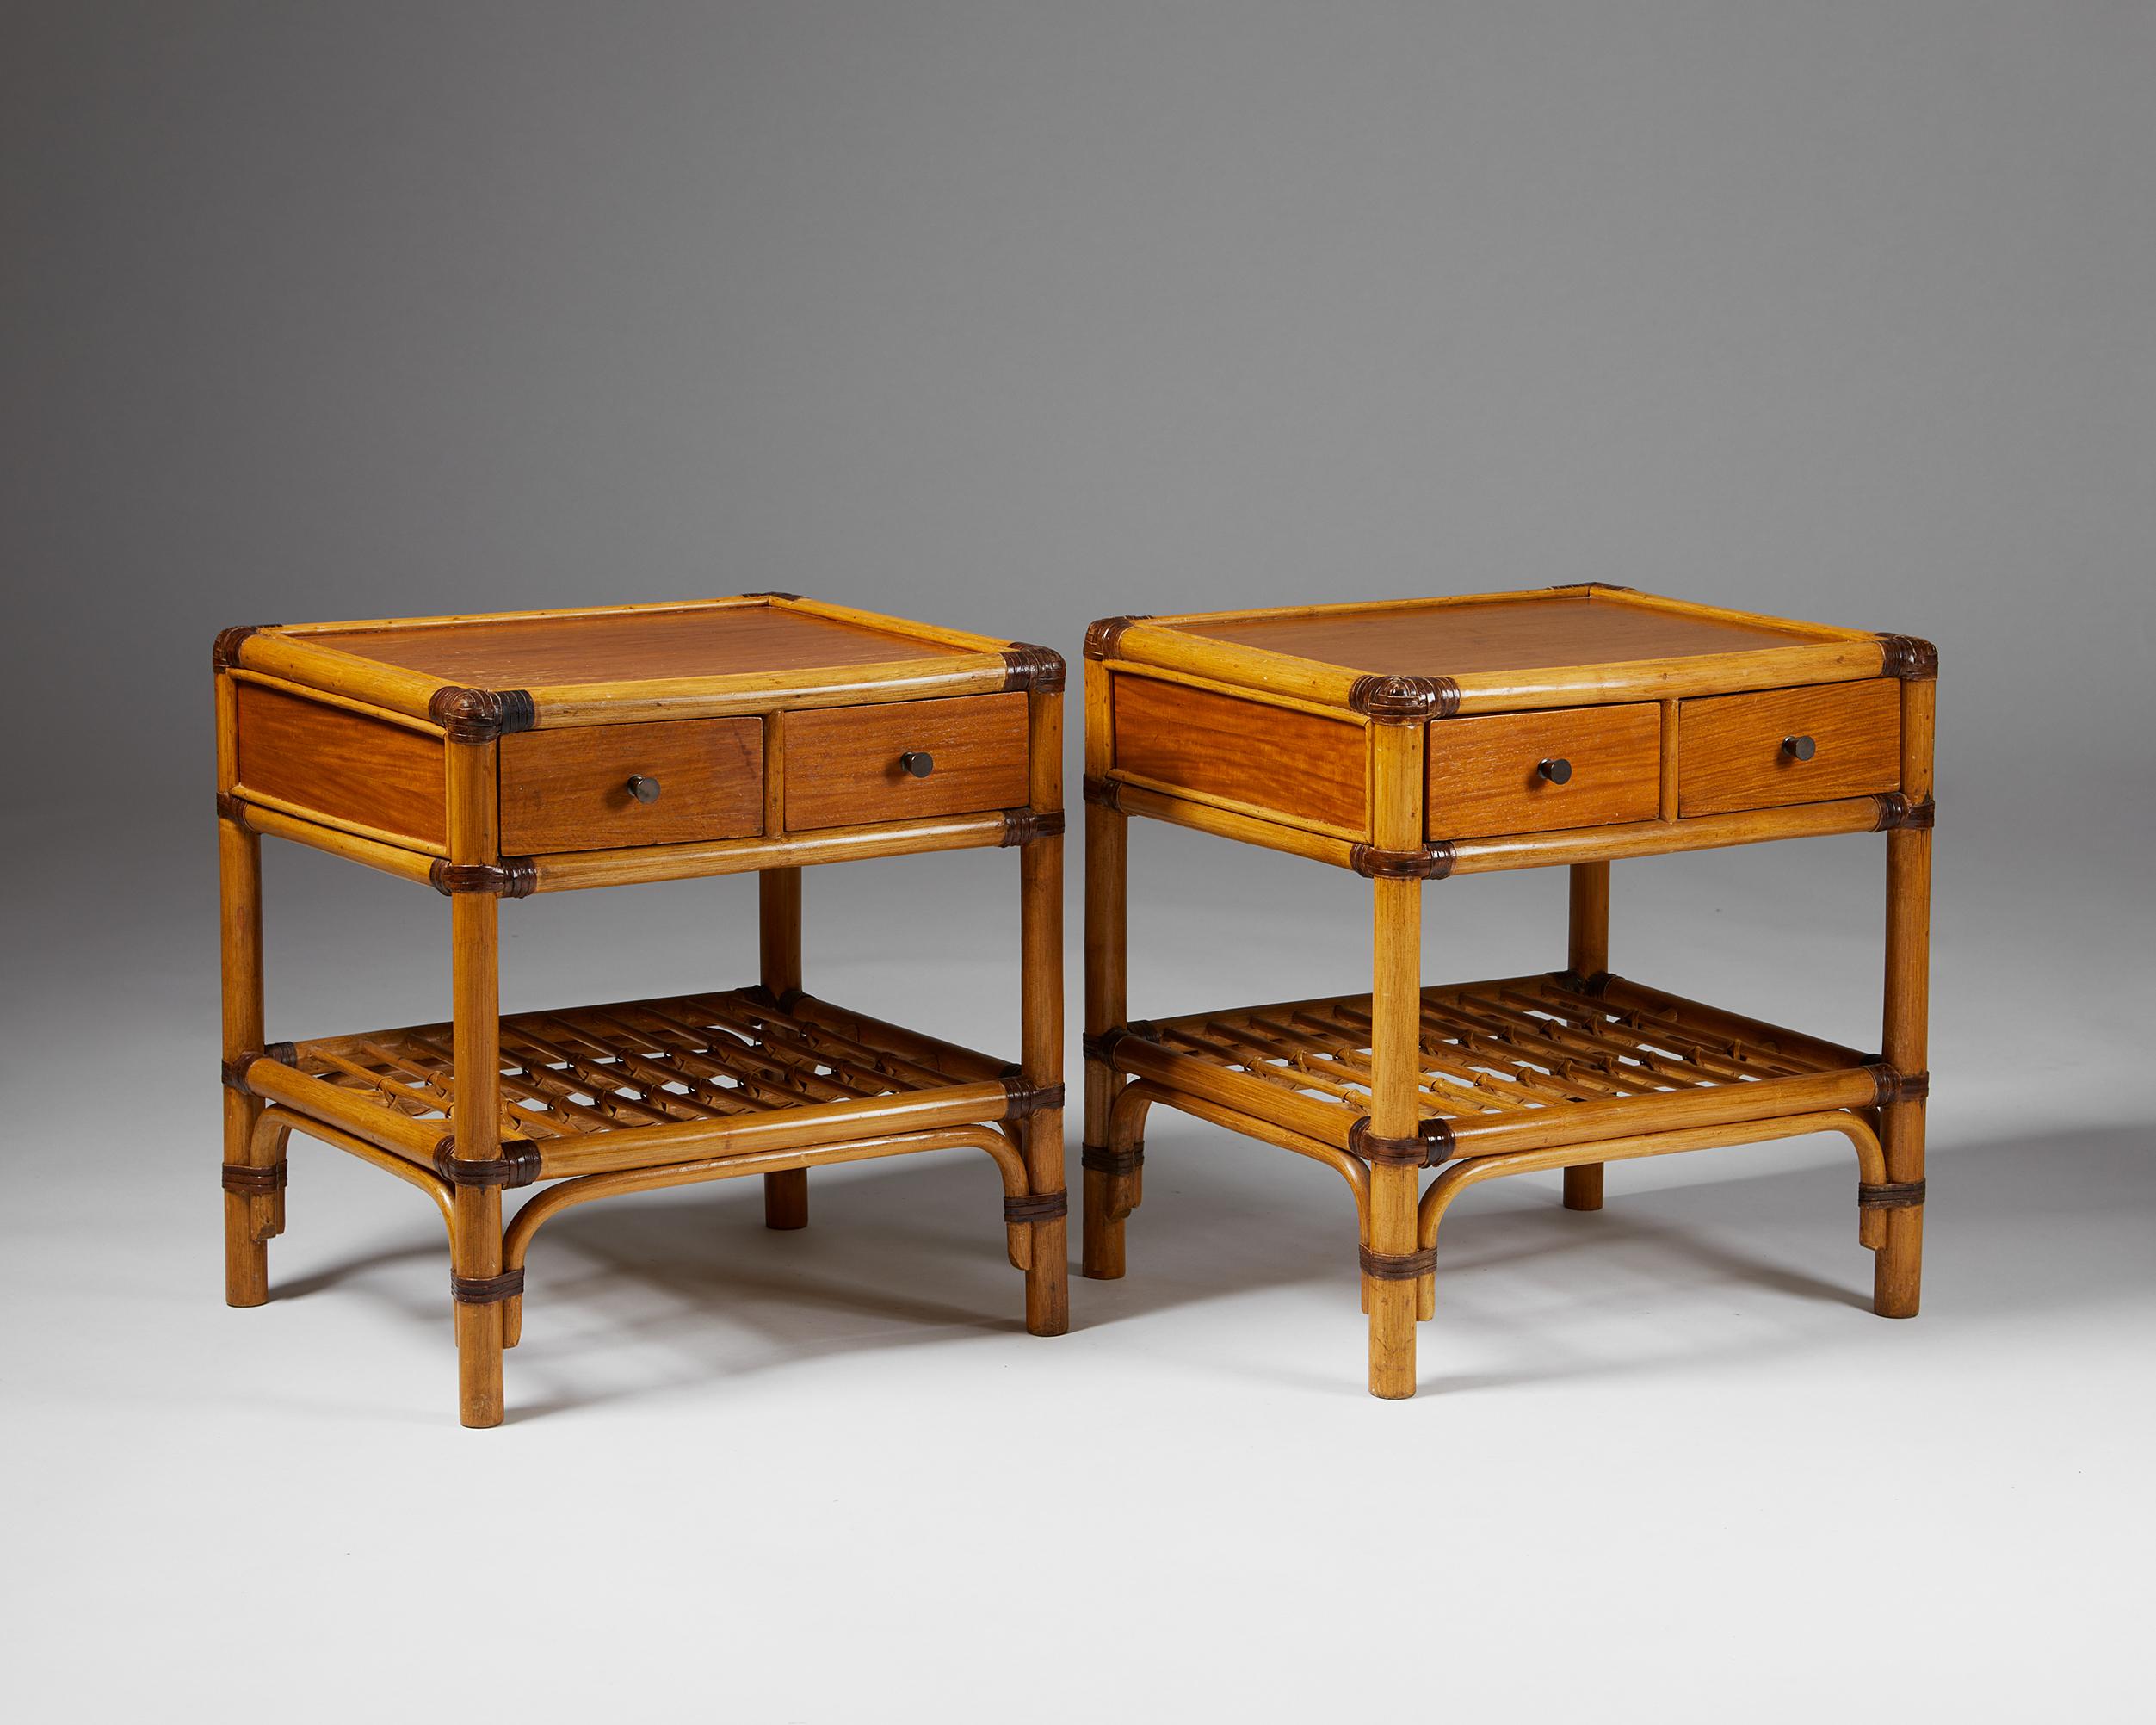 Pair of bedside tables, anonymous for DUX,
Sweden. 1960s.

Bamboo, rattan, cane, wood.

The colonial-style combination of bamboo, stained rattan, cane, and wood makes this Scandinavian bedside table design particularly interesting. The darker woven